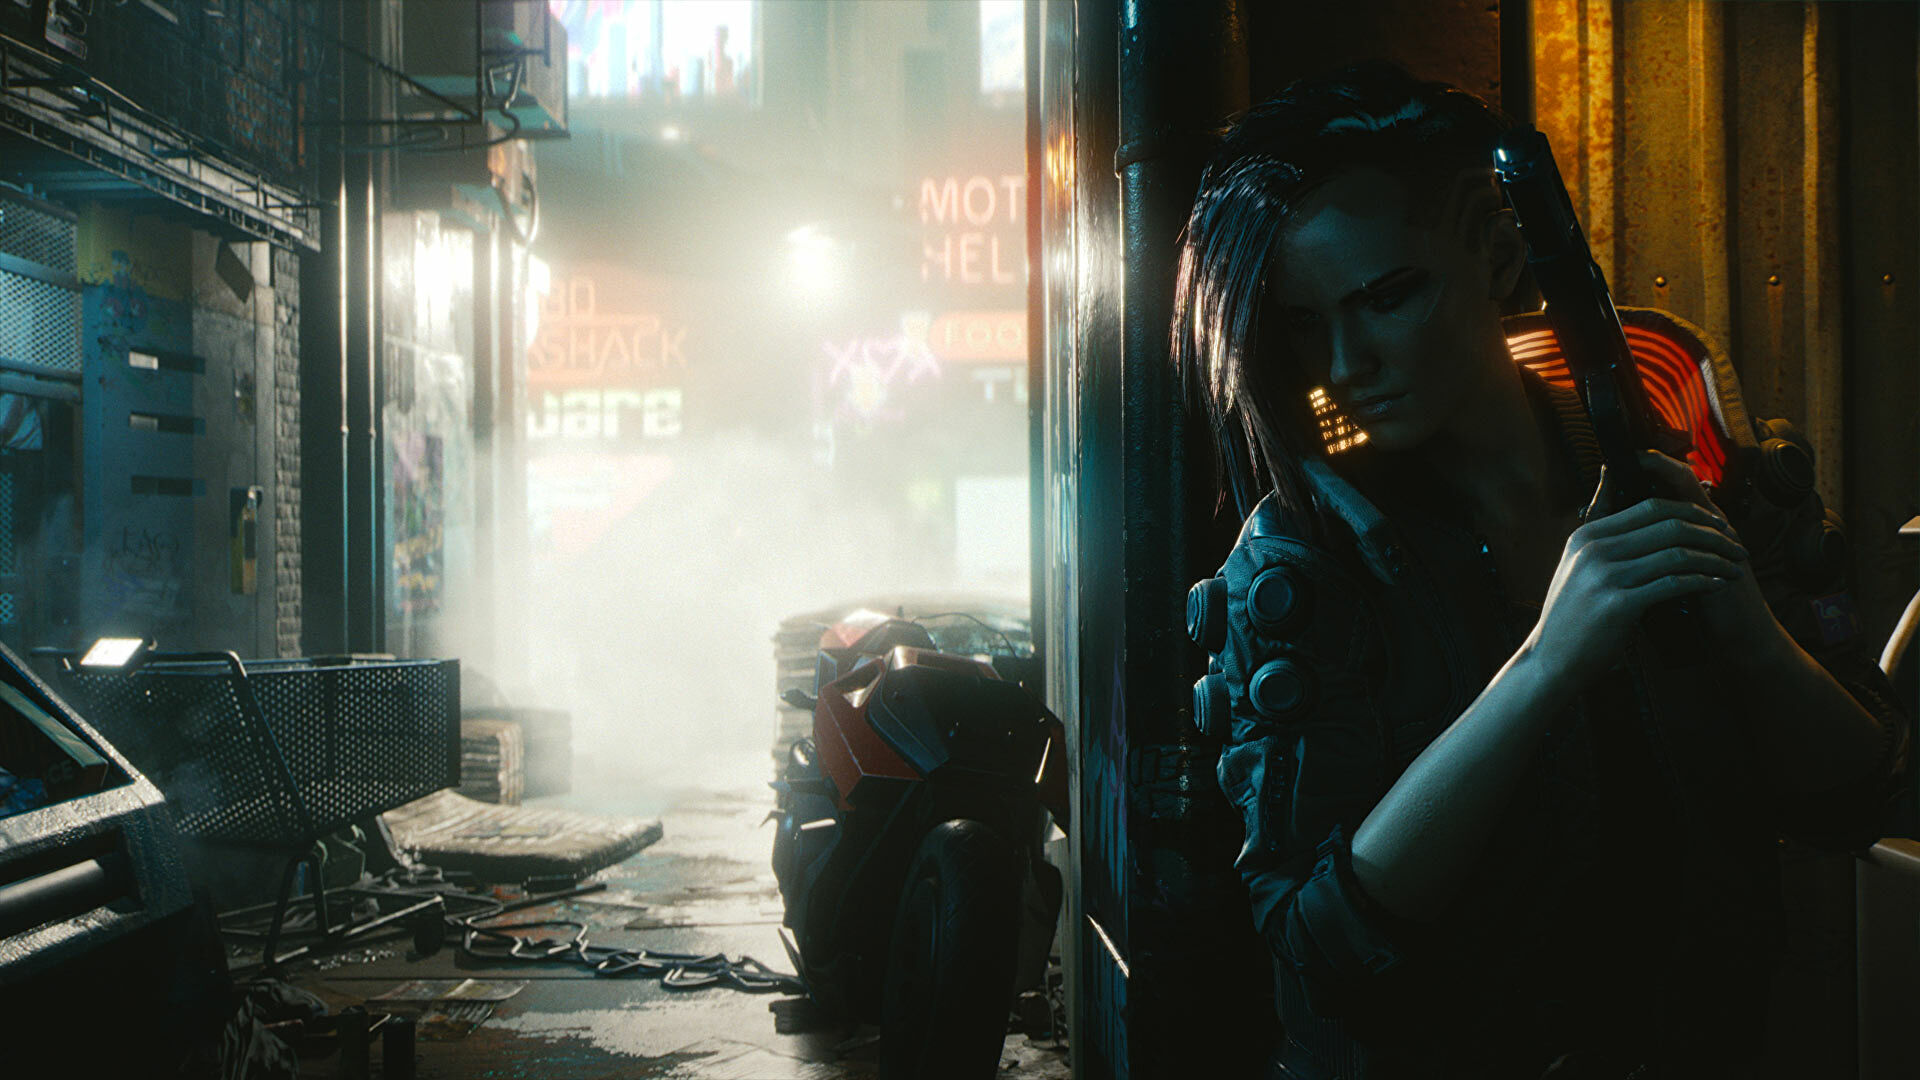 CD Projekt has released an official modding tool for Cyberpunk 2077